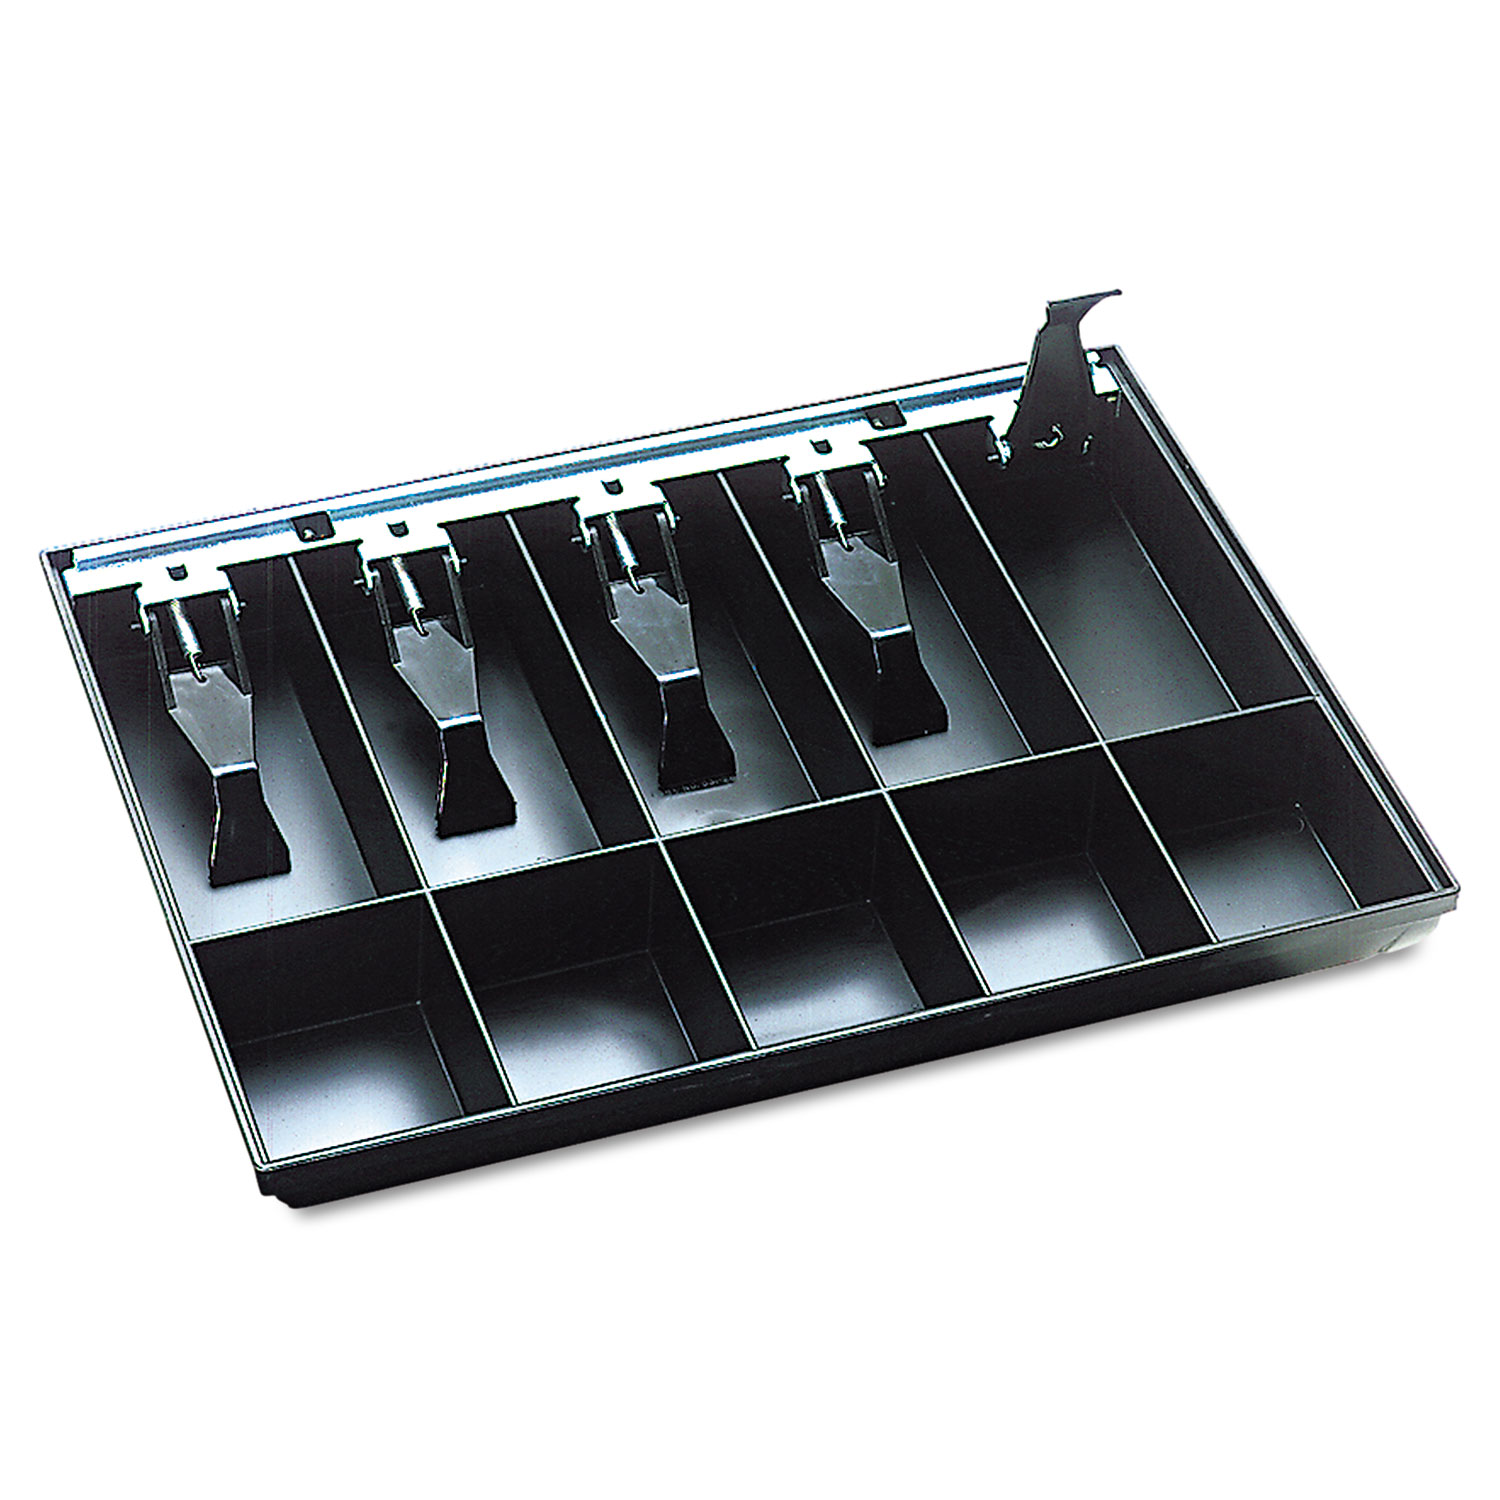  SteelMaster 225286204 Cash Drawer Replacement Tray, Black (MMF225286204) 